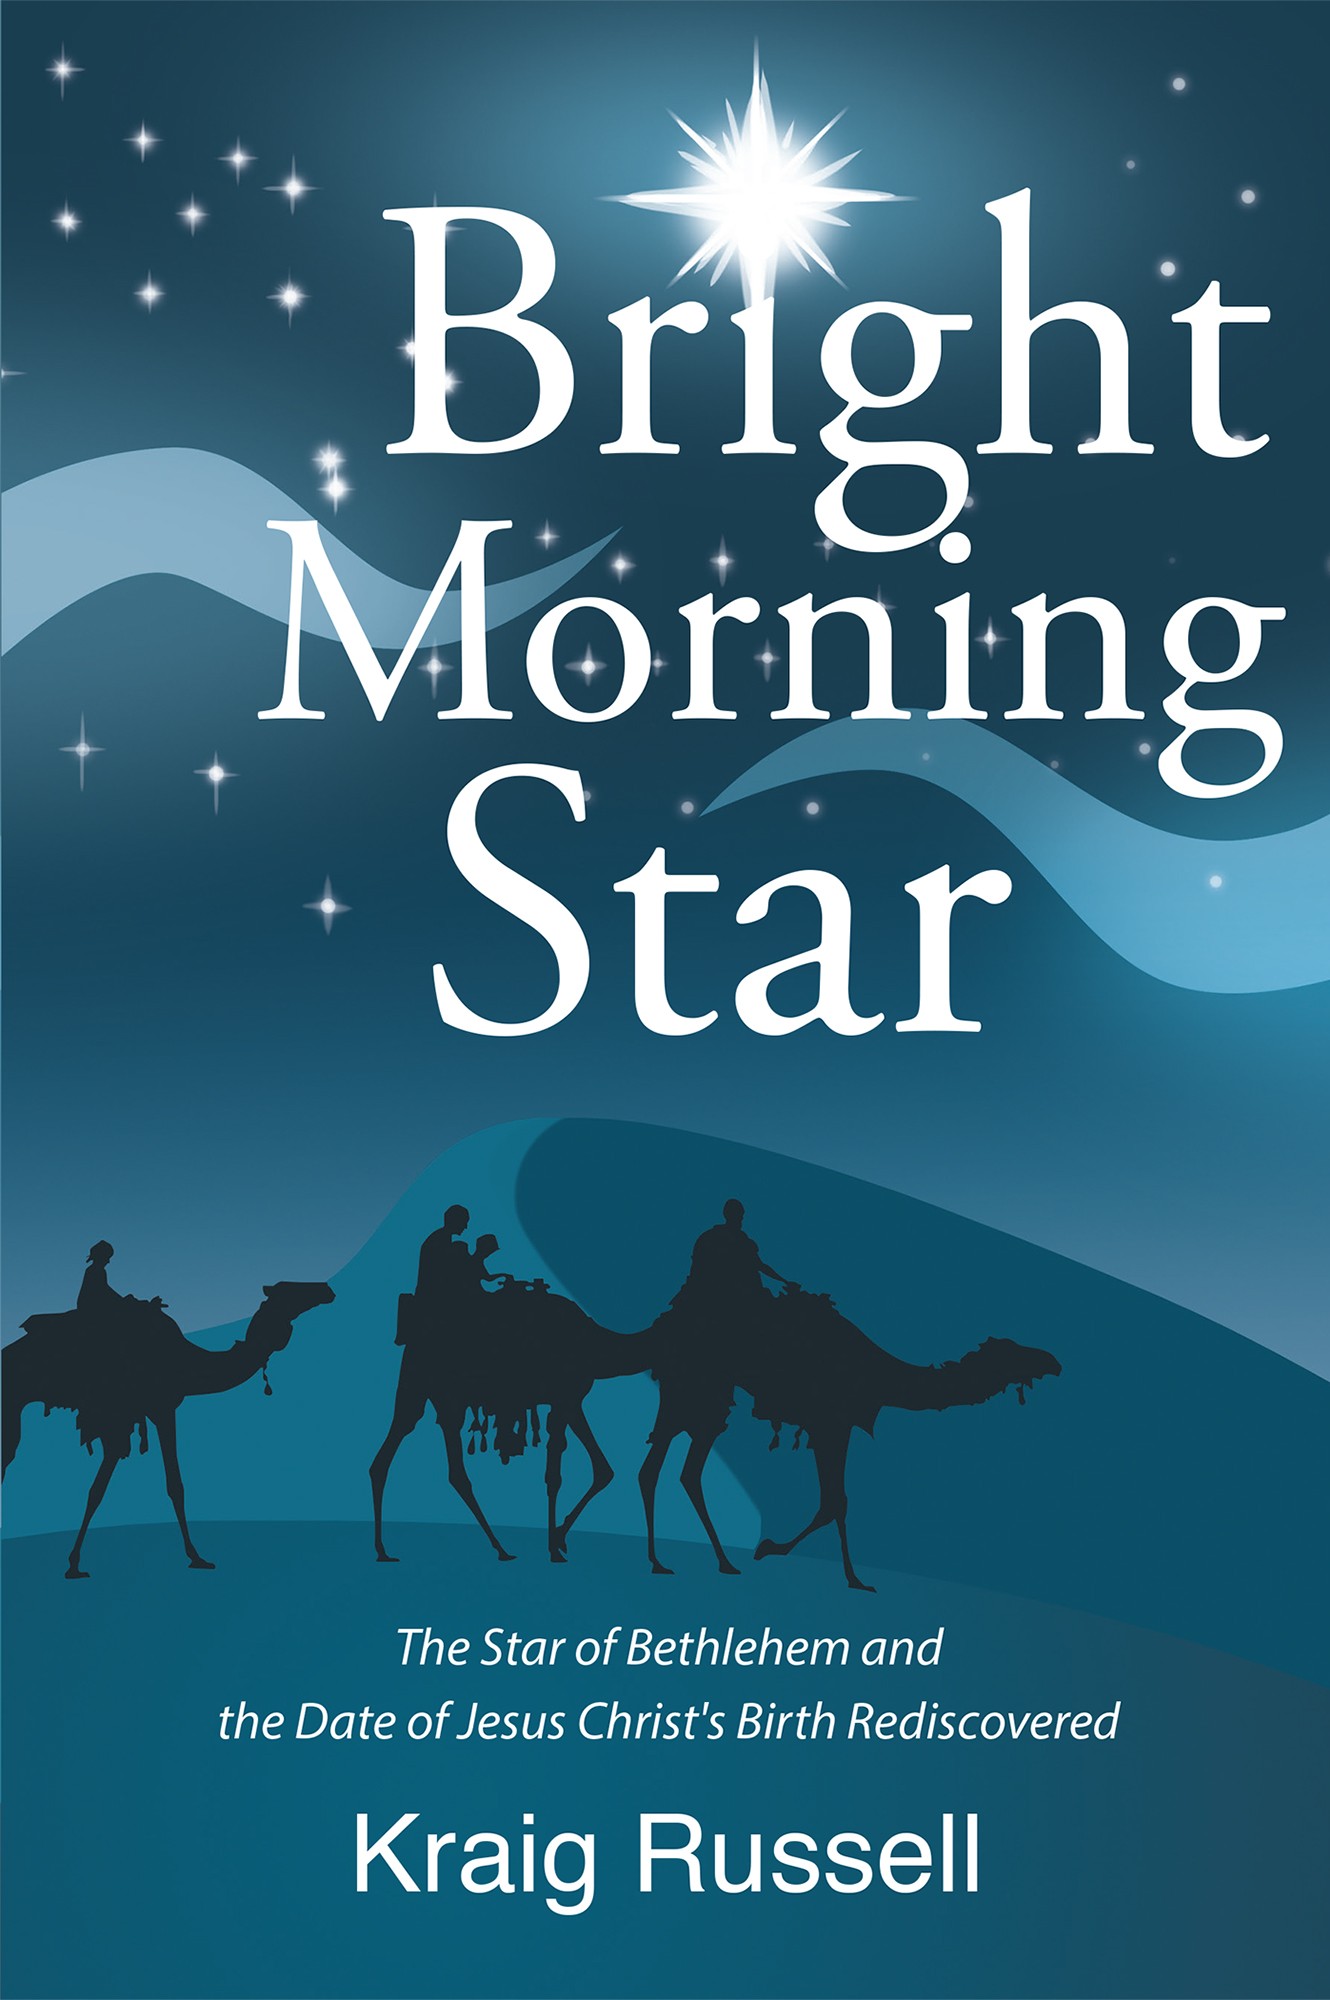 Bright Morning Star Home Health Aide 35